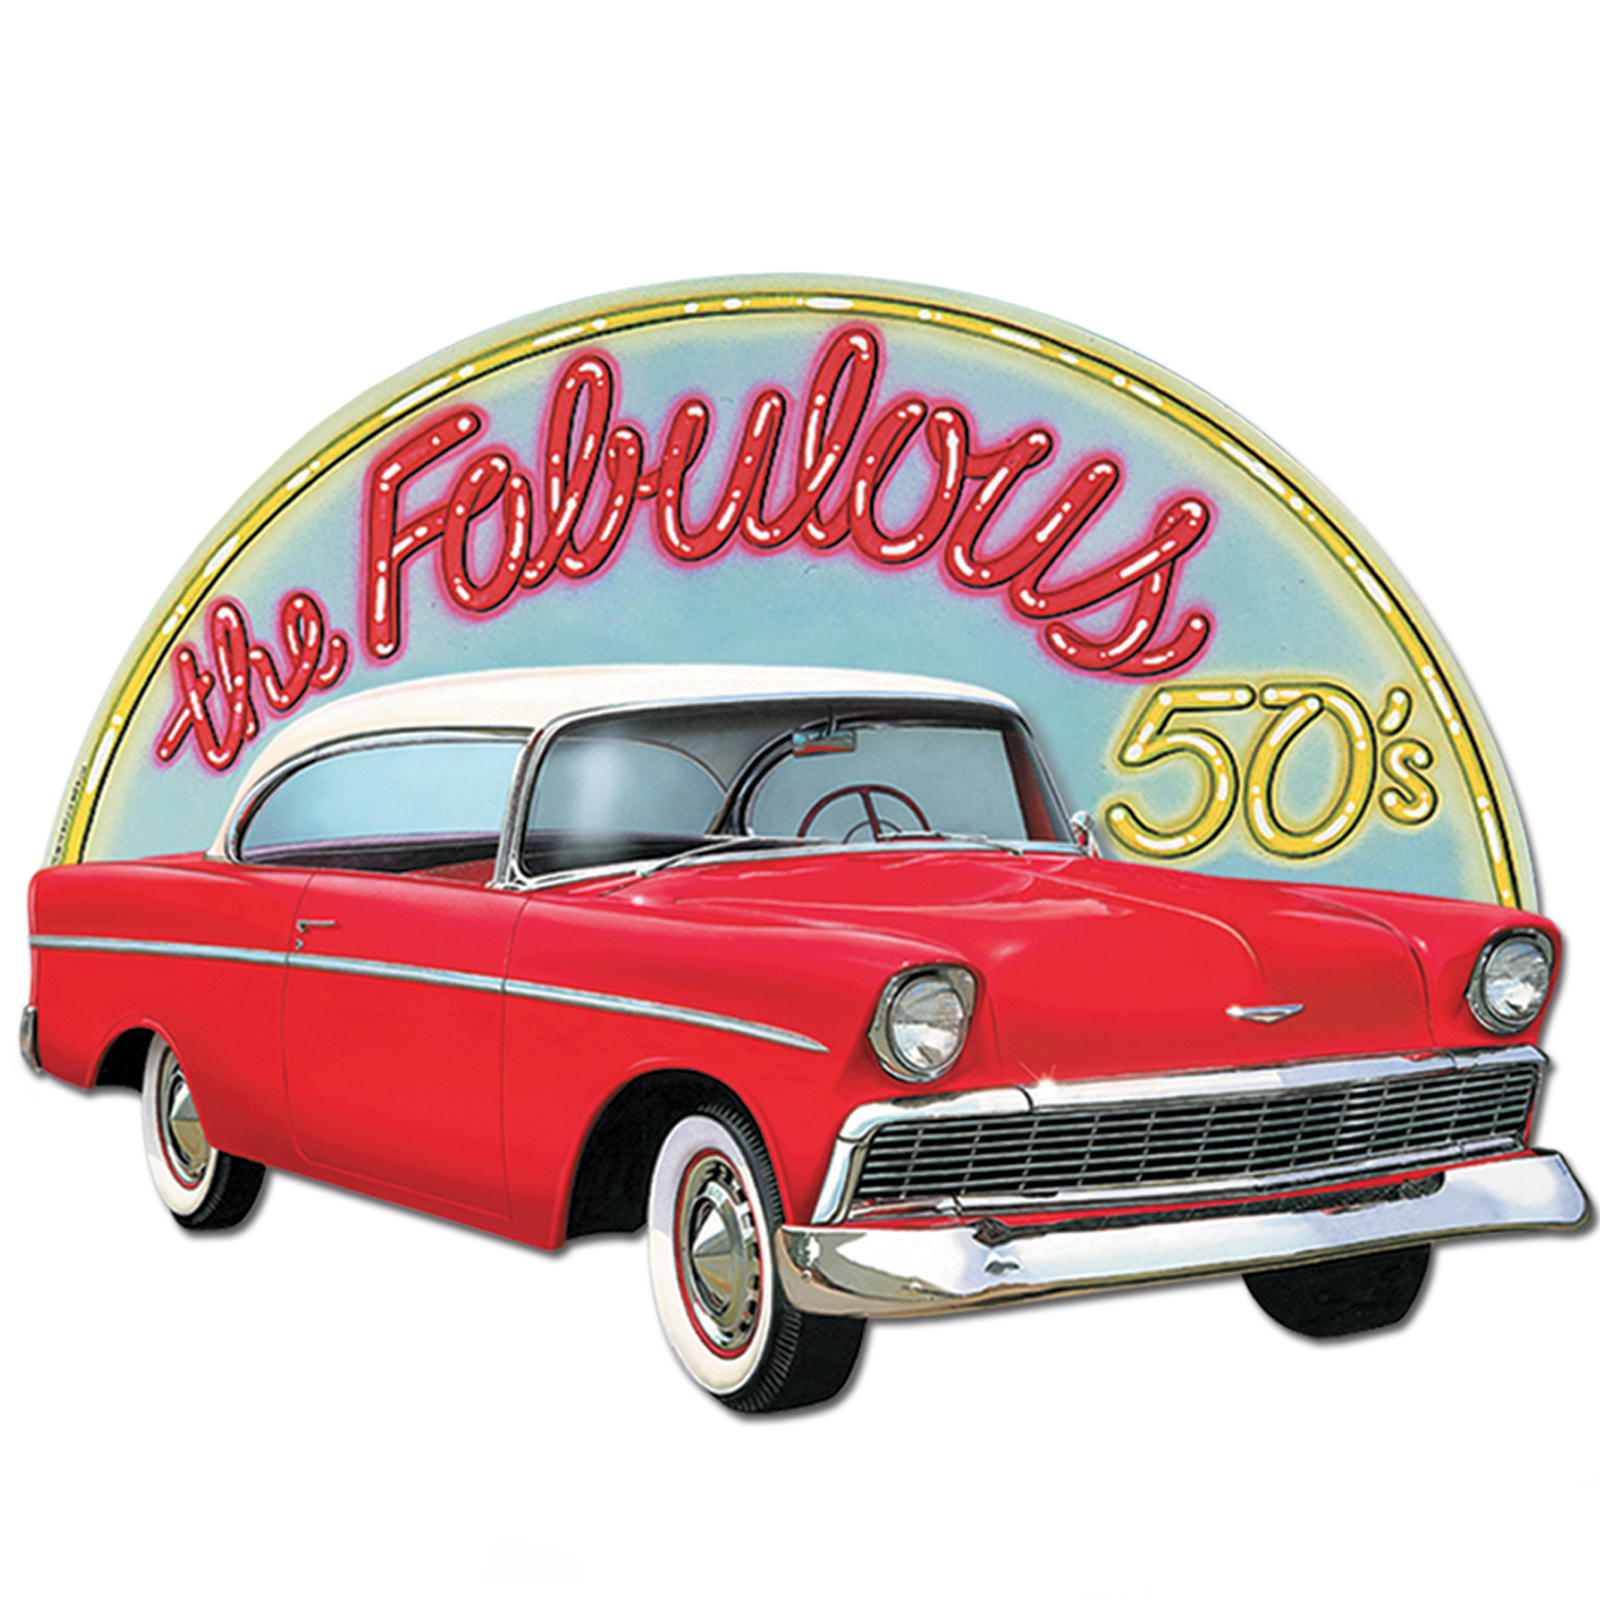 Free fabulous s cliparts. Record clipart 50's car